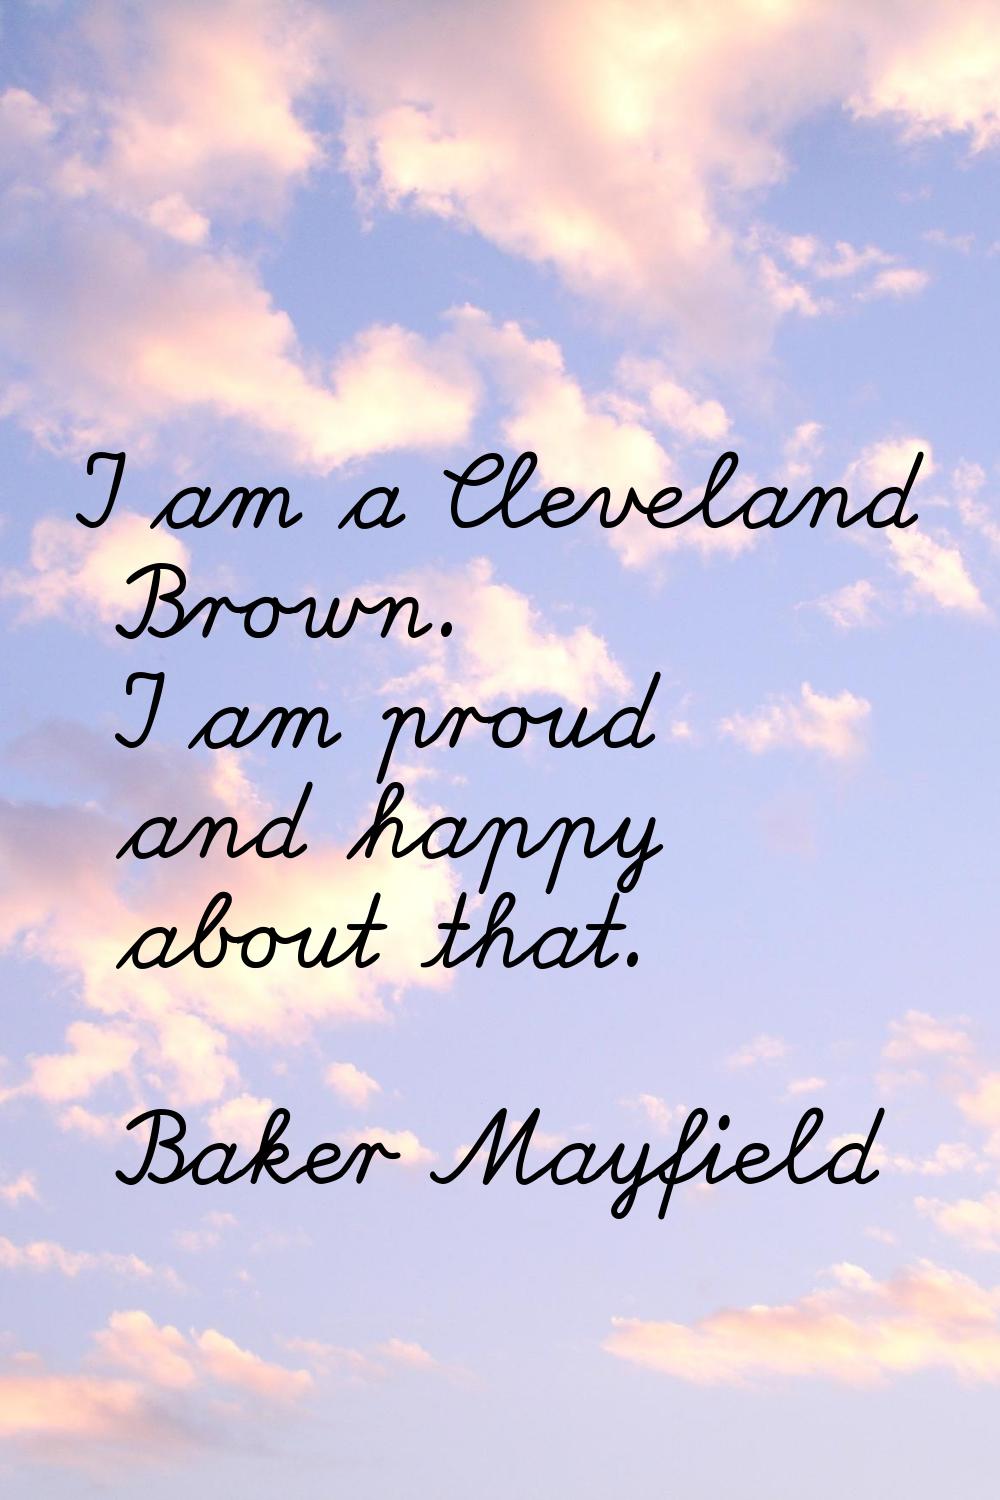 I am a Cleveland Brown. I am proud and happy about that.